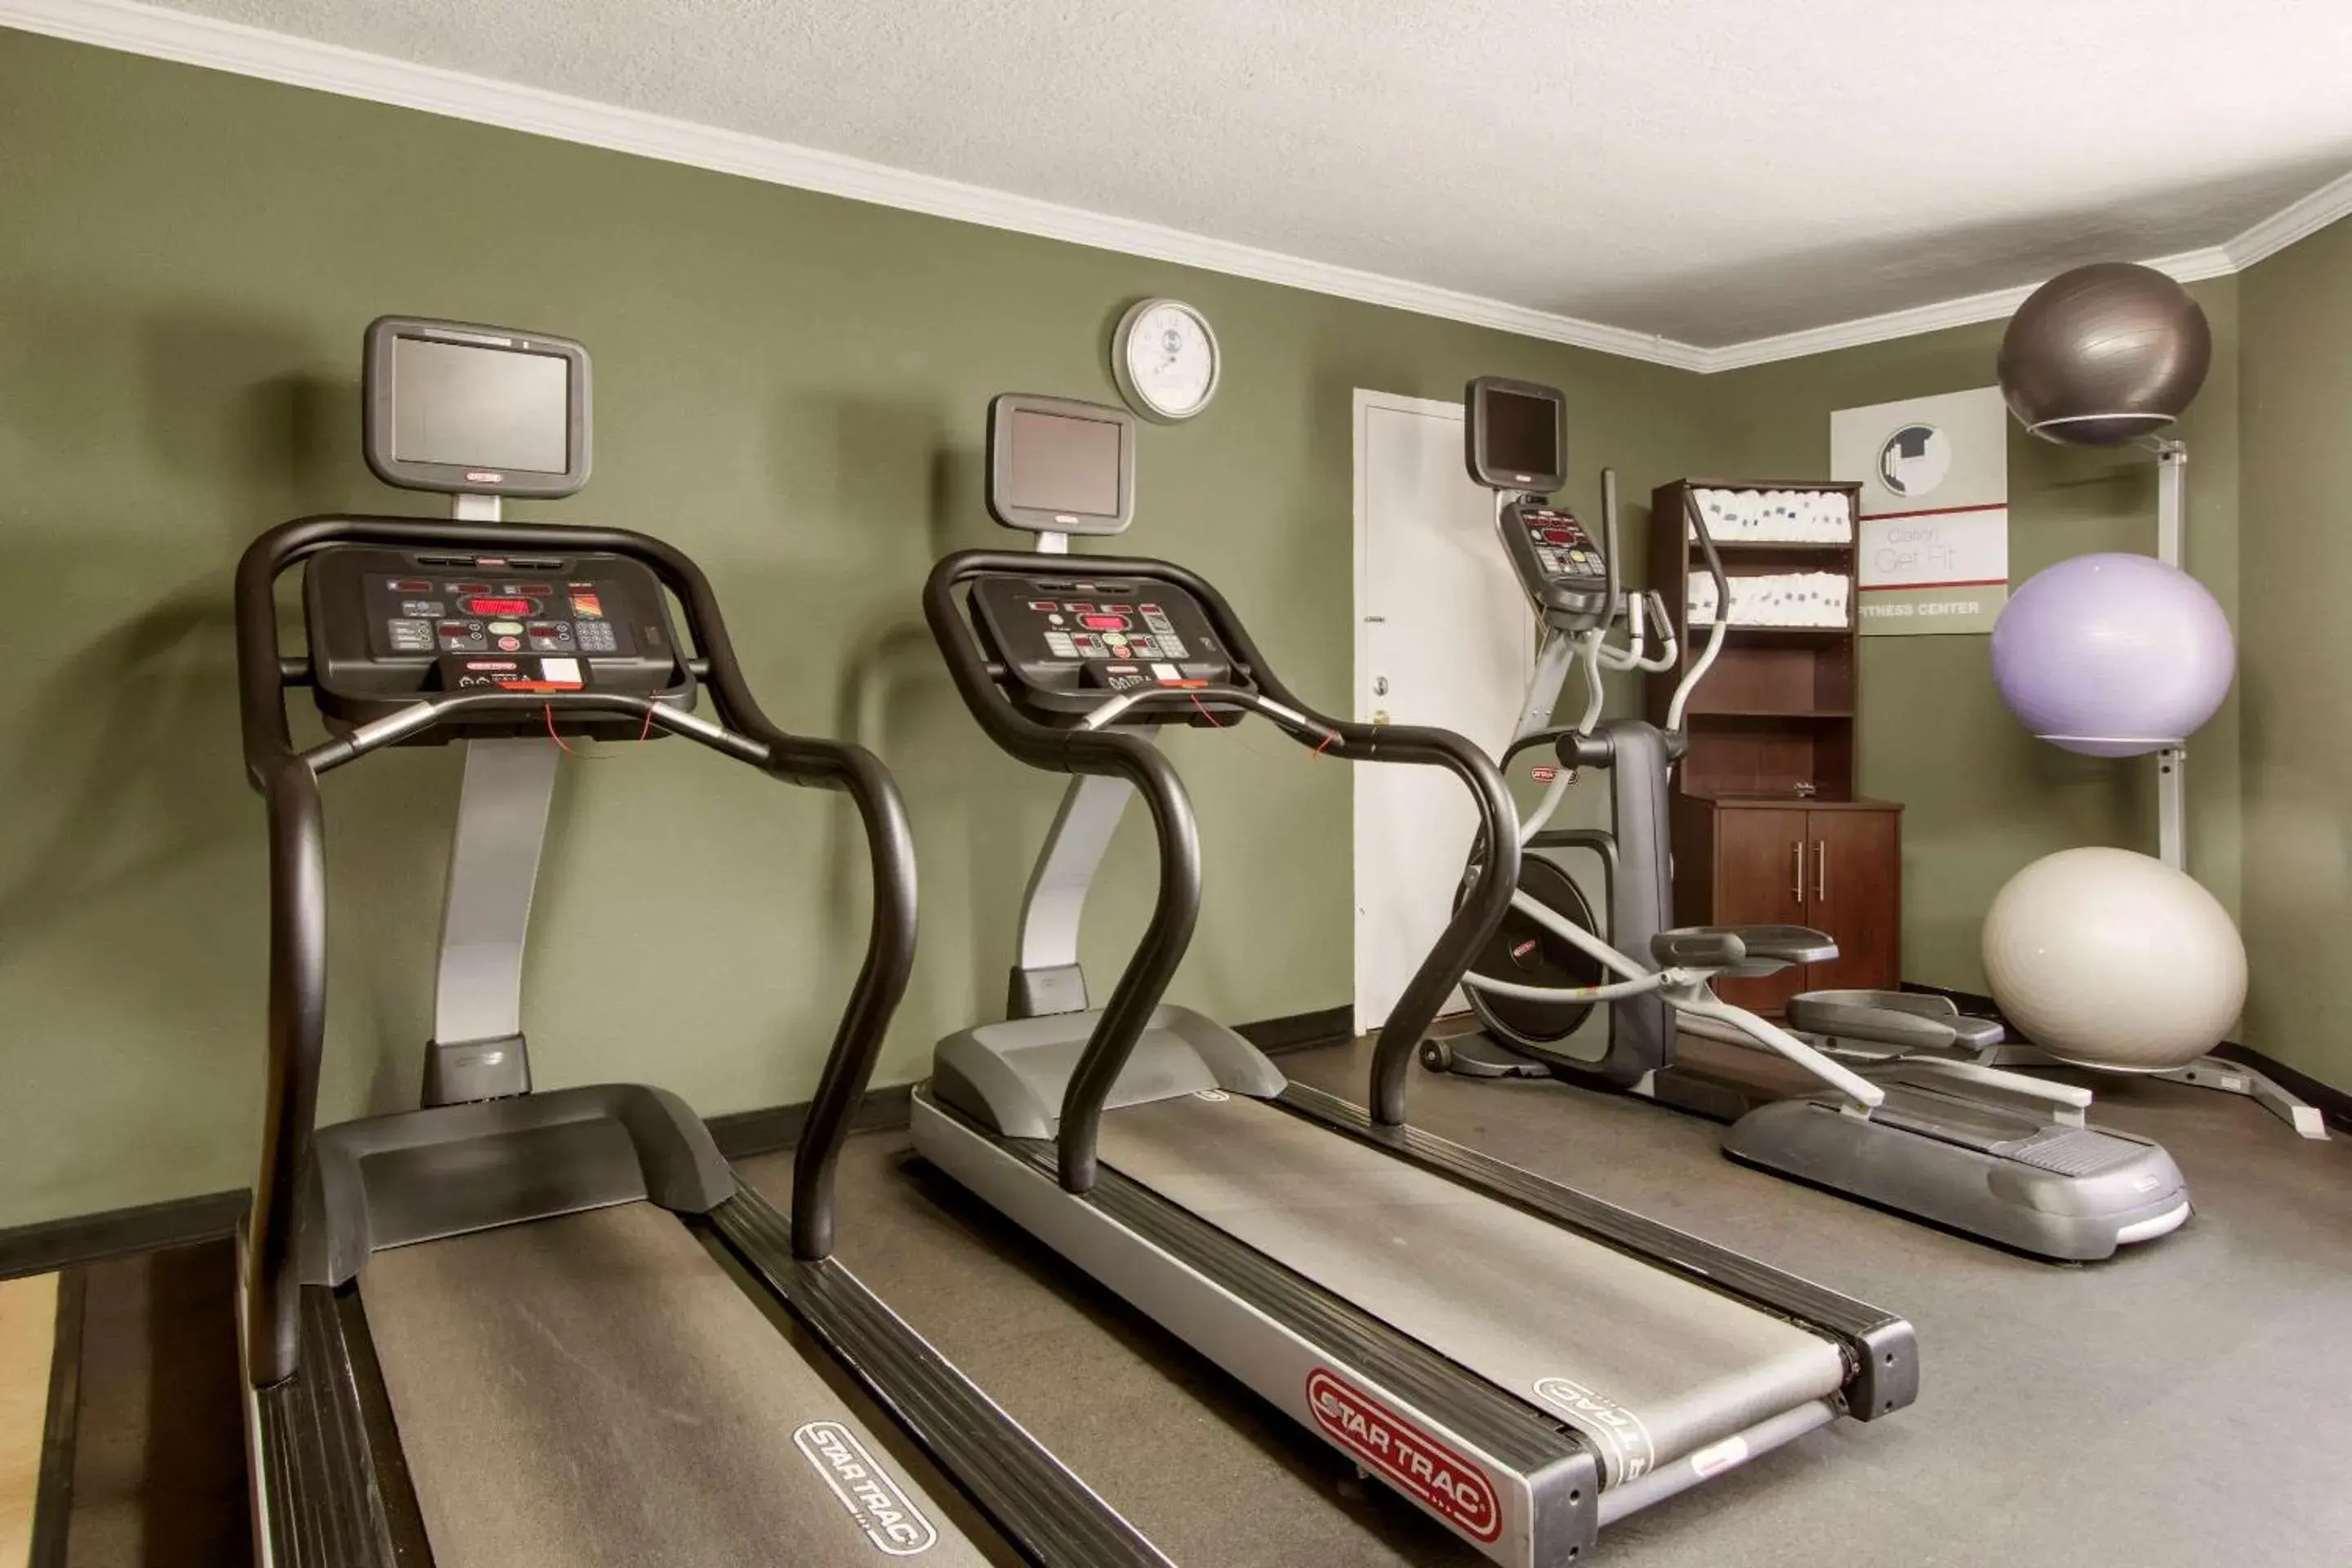 Fitness centre/facilities, Fitness Center/Facilities in Clarion Inn Asheville Airport